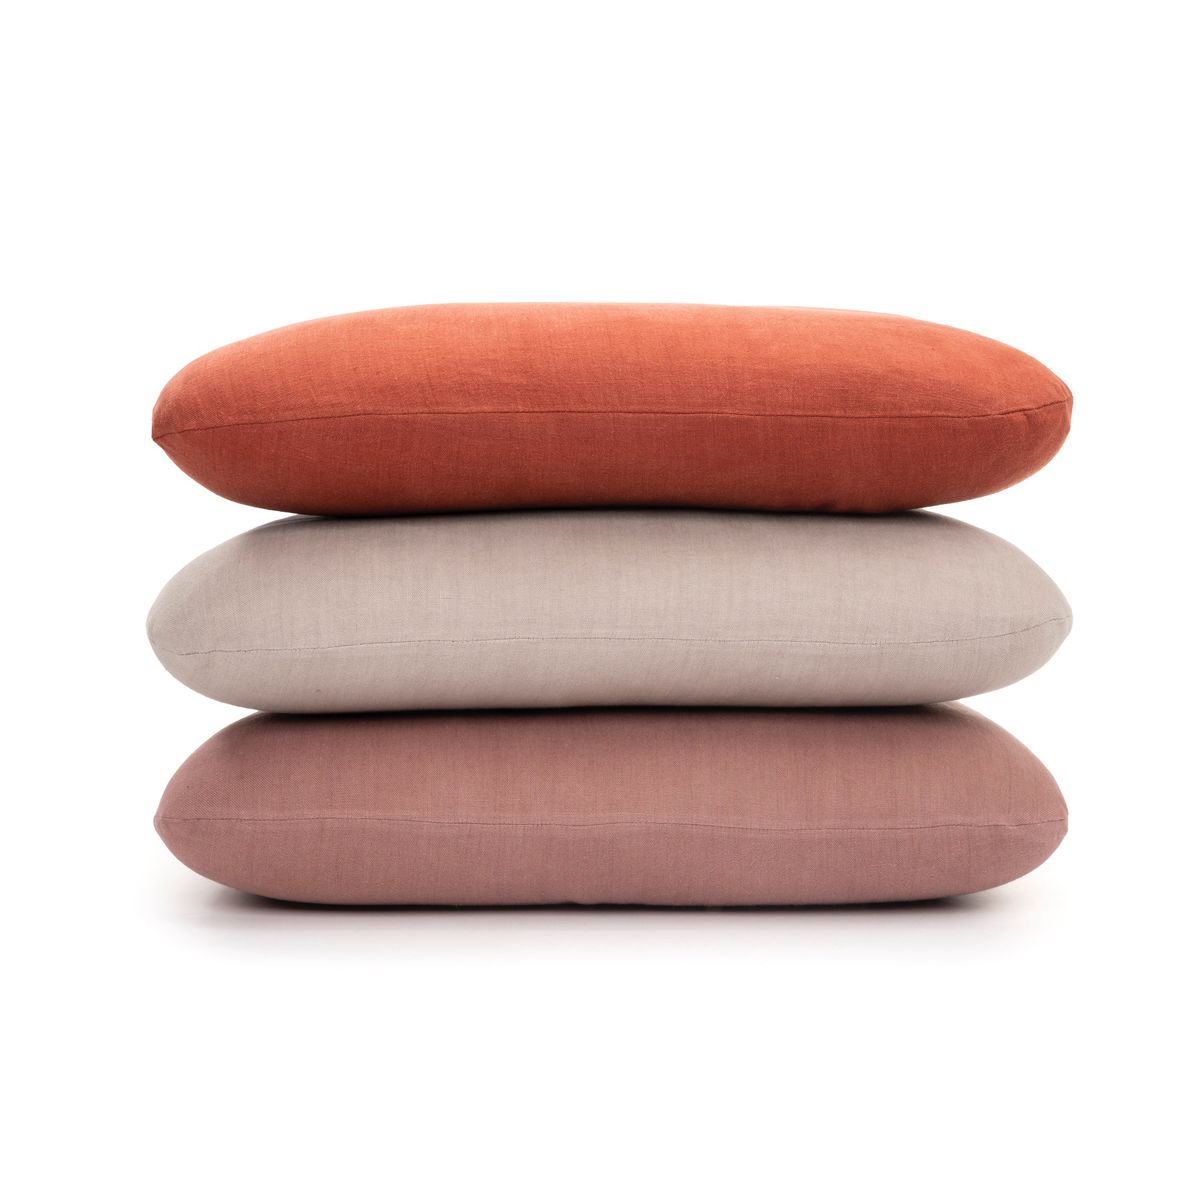 studiopepe x oncemilano rounded cushion